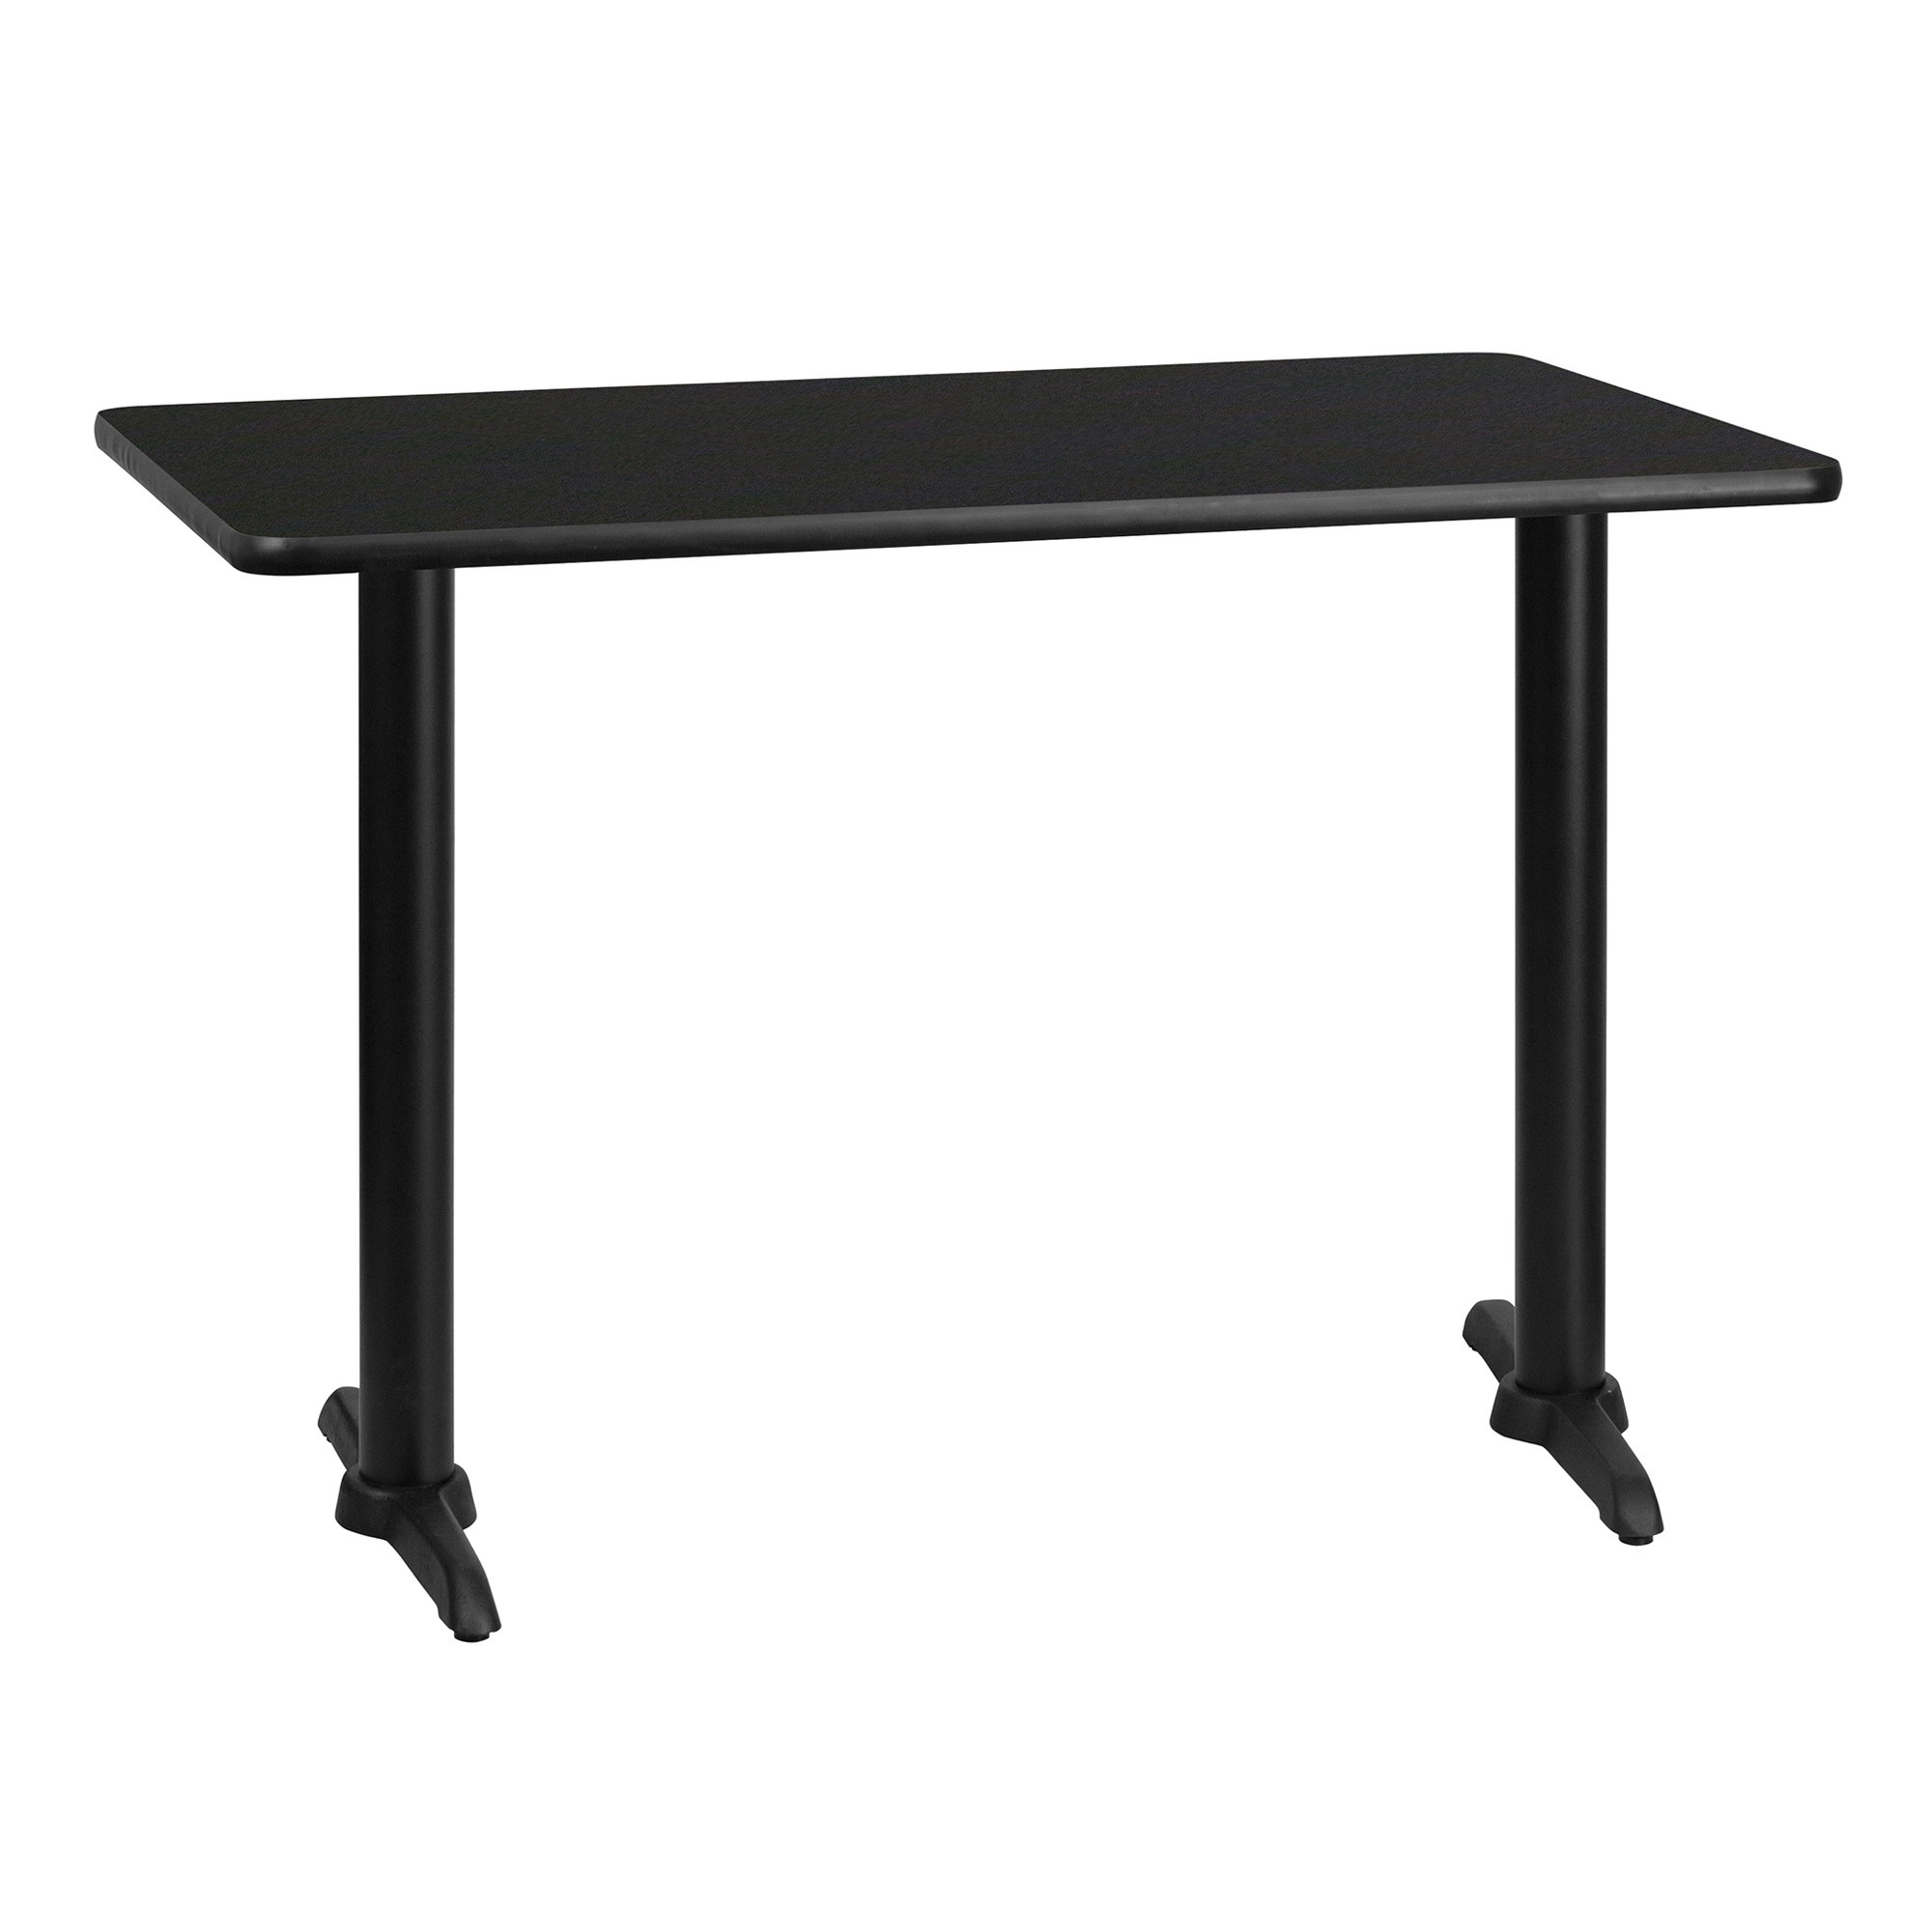 Flash Furniture 42Inch L x 30Inch W Table with Laminate Top and T-Base â Reversible Black/Mahogany Top, Model XUBK3042T0522